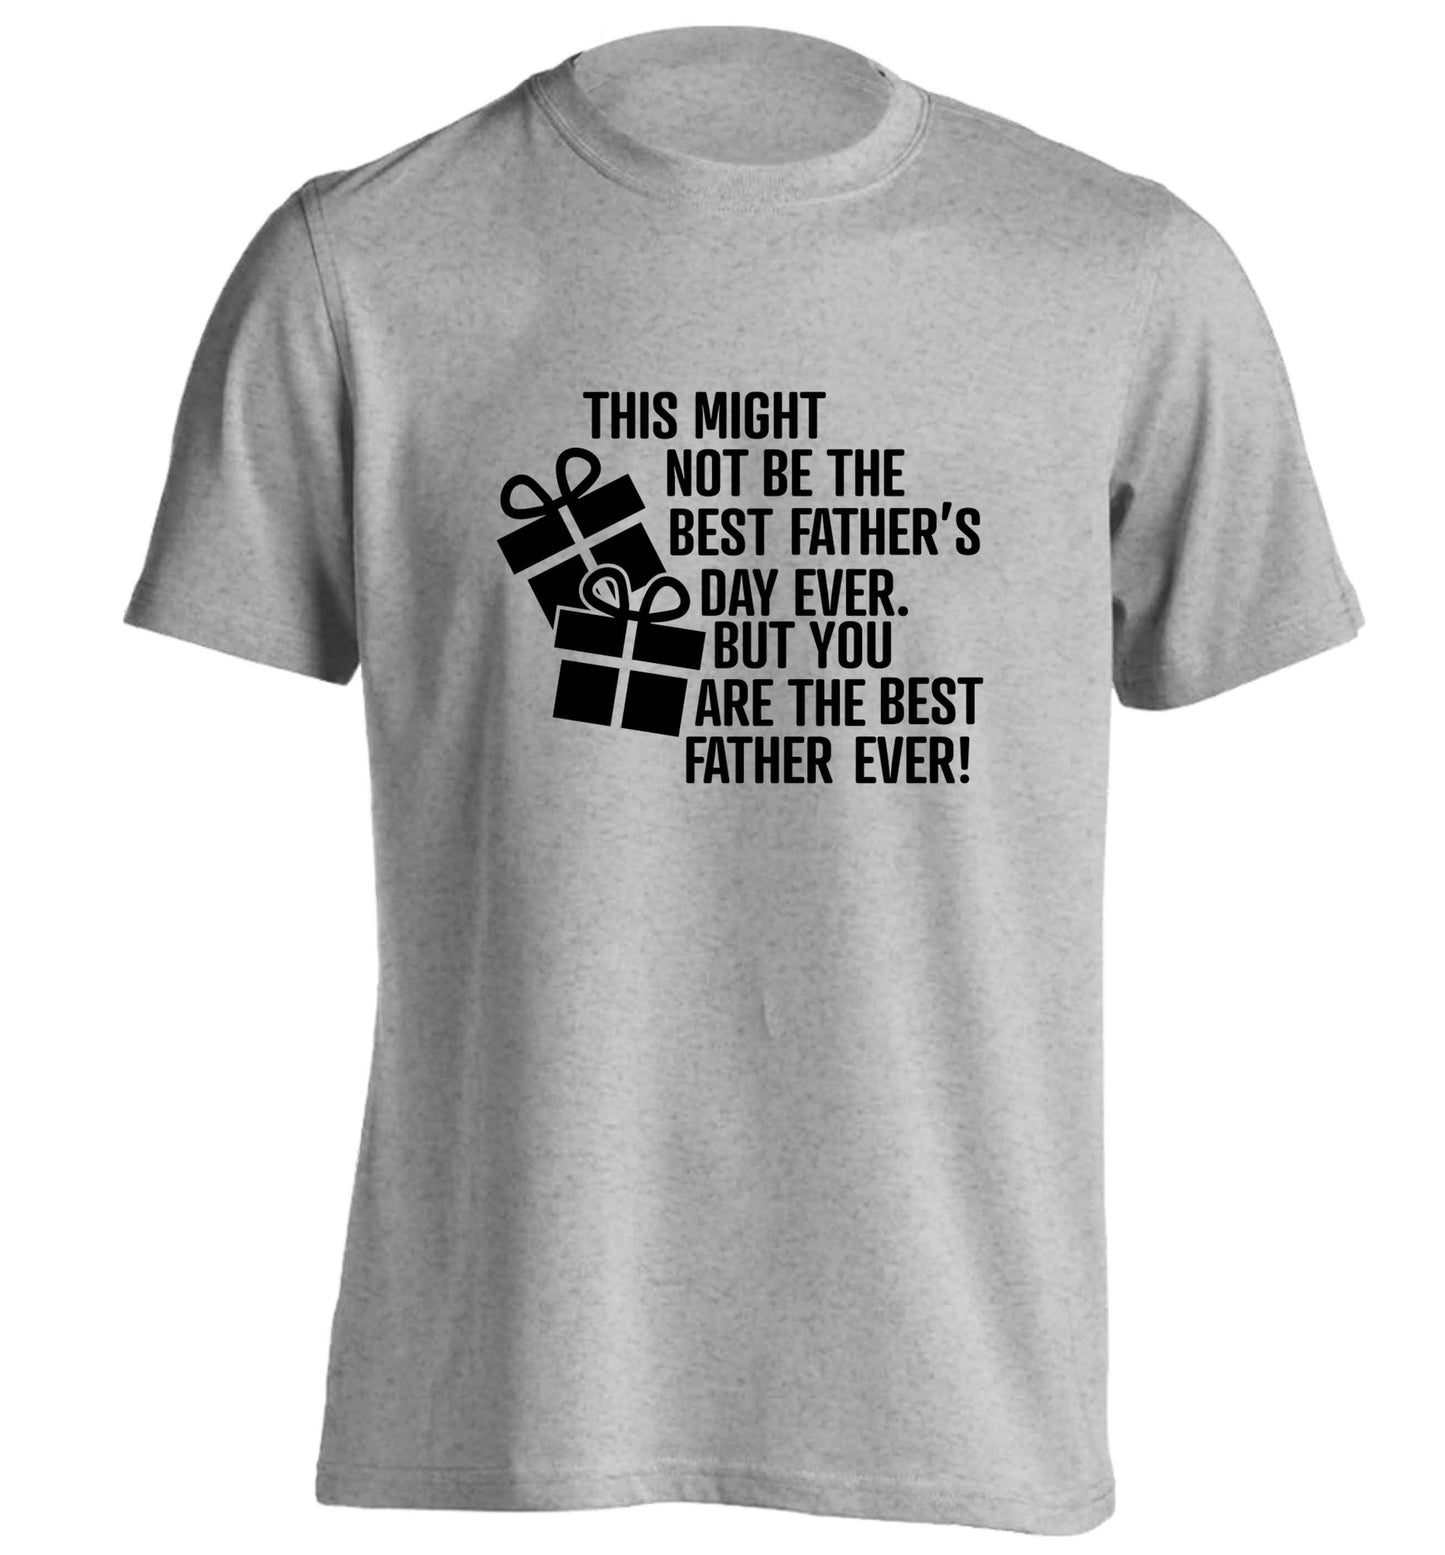 It might not be the best Father's Day ever but you are the best father ever! adults unisex grey Tshirt 2XL